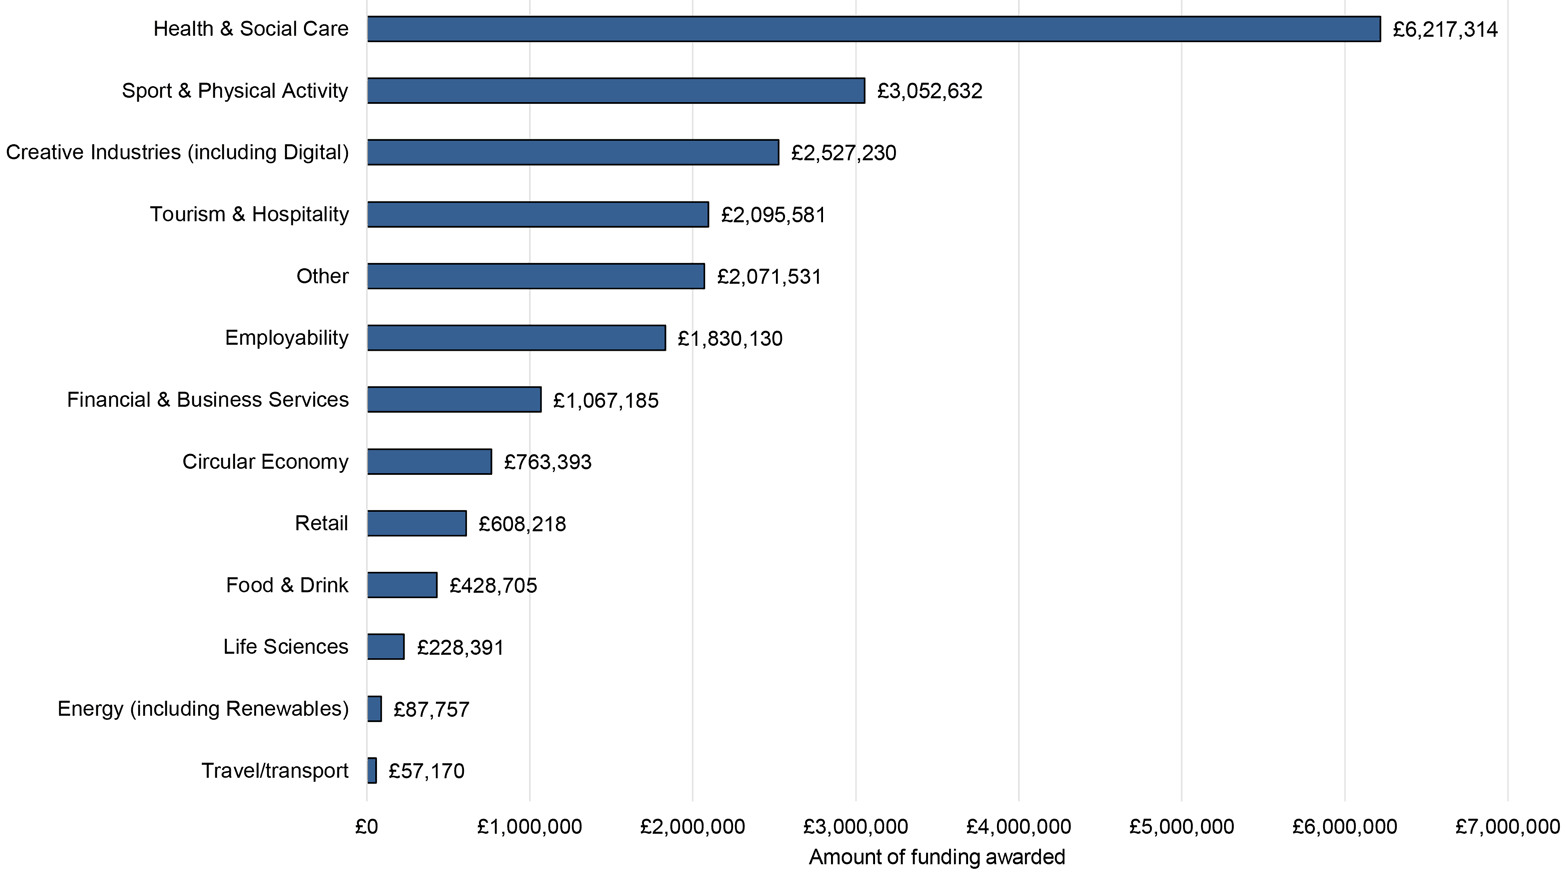 total combined value of funding awarded to organisations in each sector. For example, it shows that the Health and Social Care sector received the largest amount (£6.2 million) of funding.